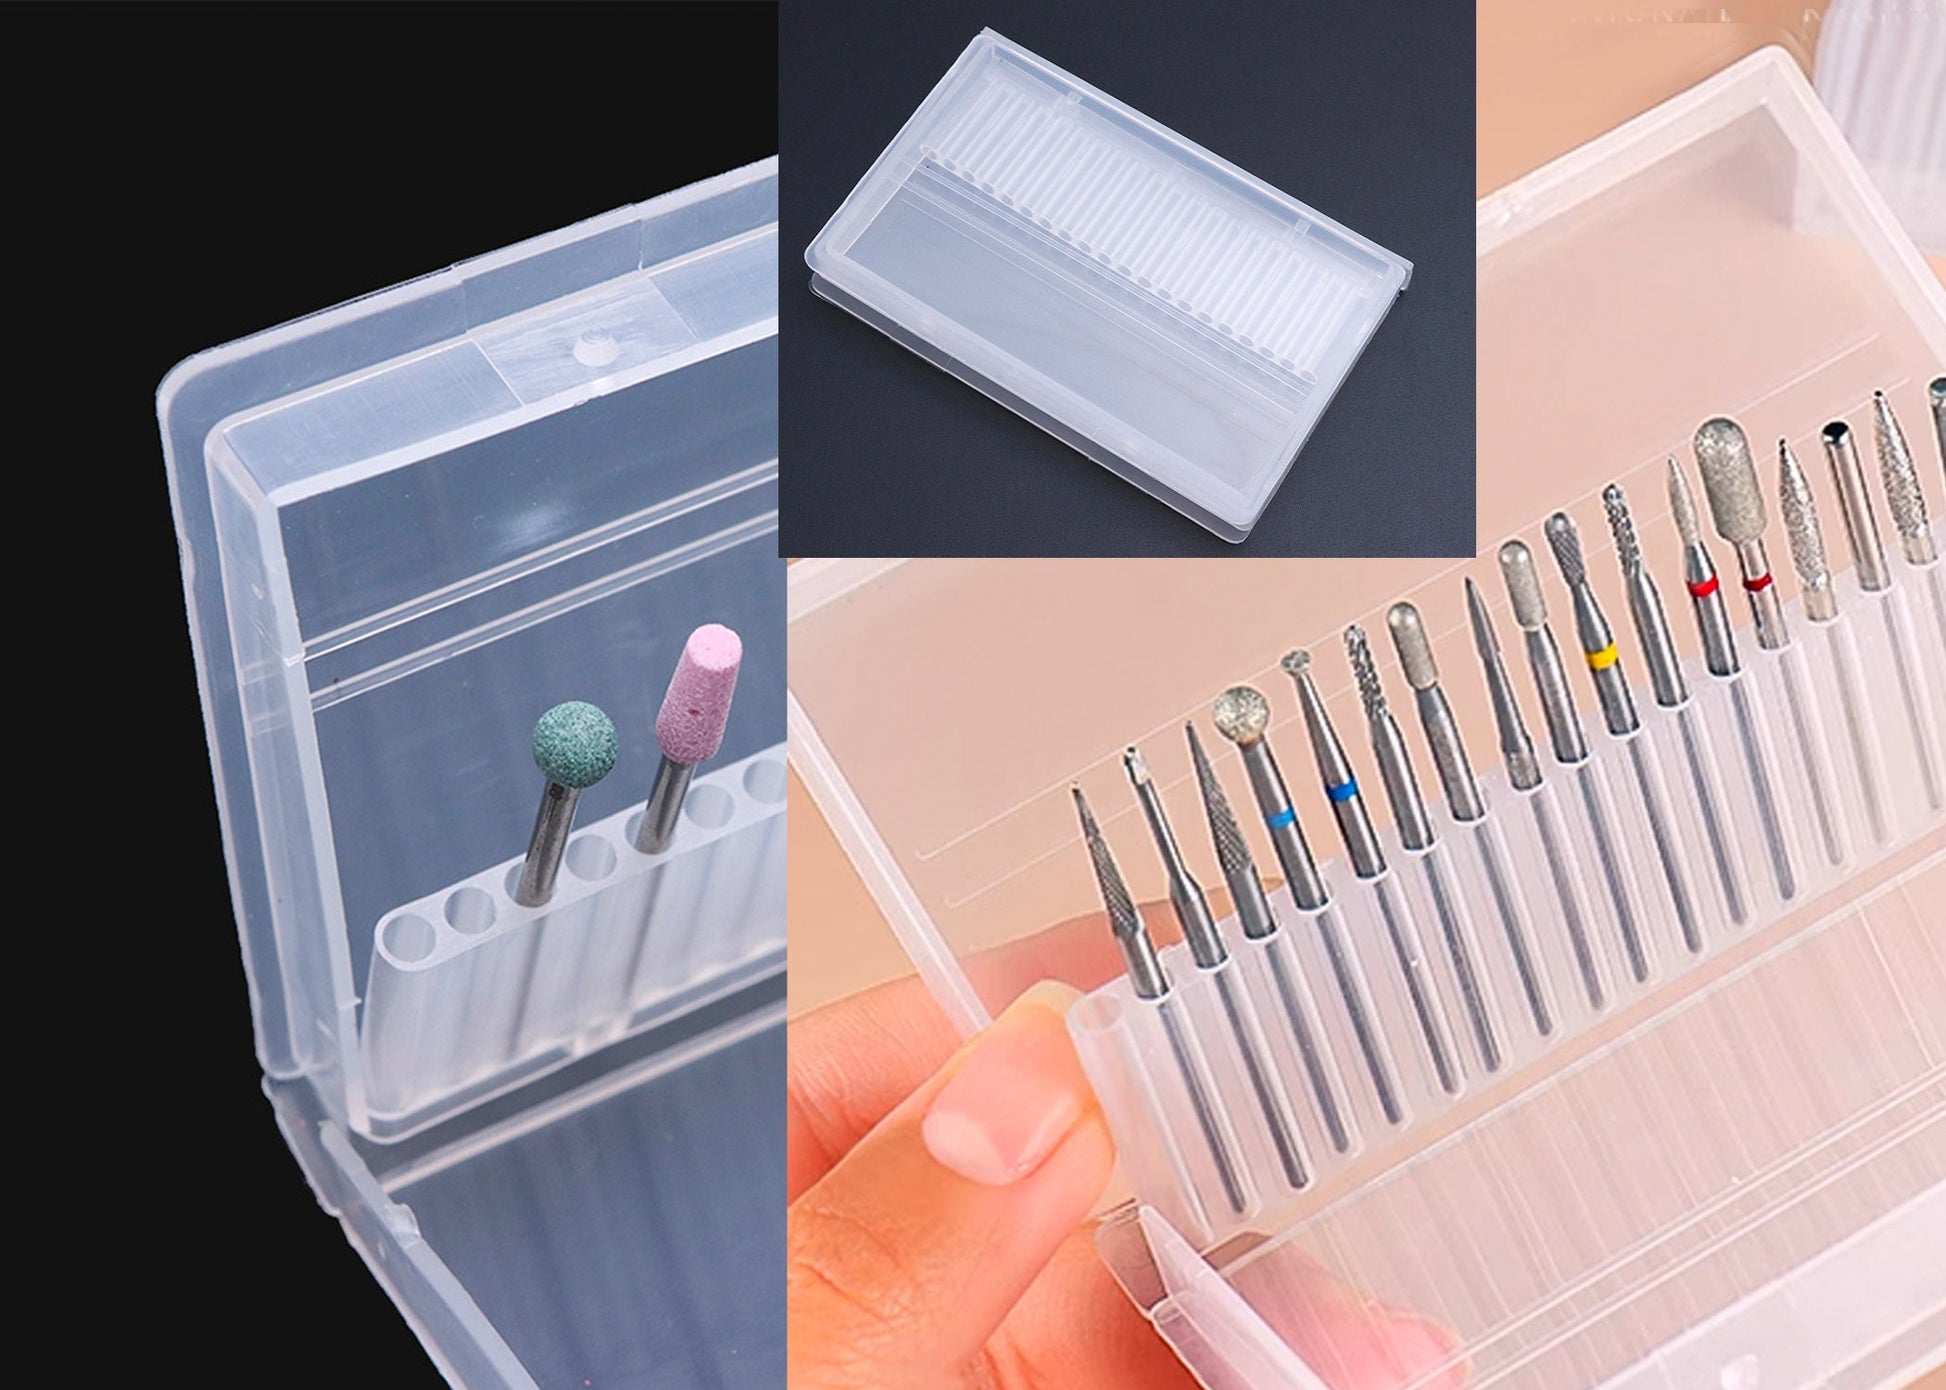 20 Holes Nail Drill Bits Container/ Plastic Display Stand Box Nail Grinding Head Holder Organizer Storage Manicure Pedicure Supply